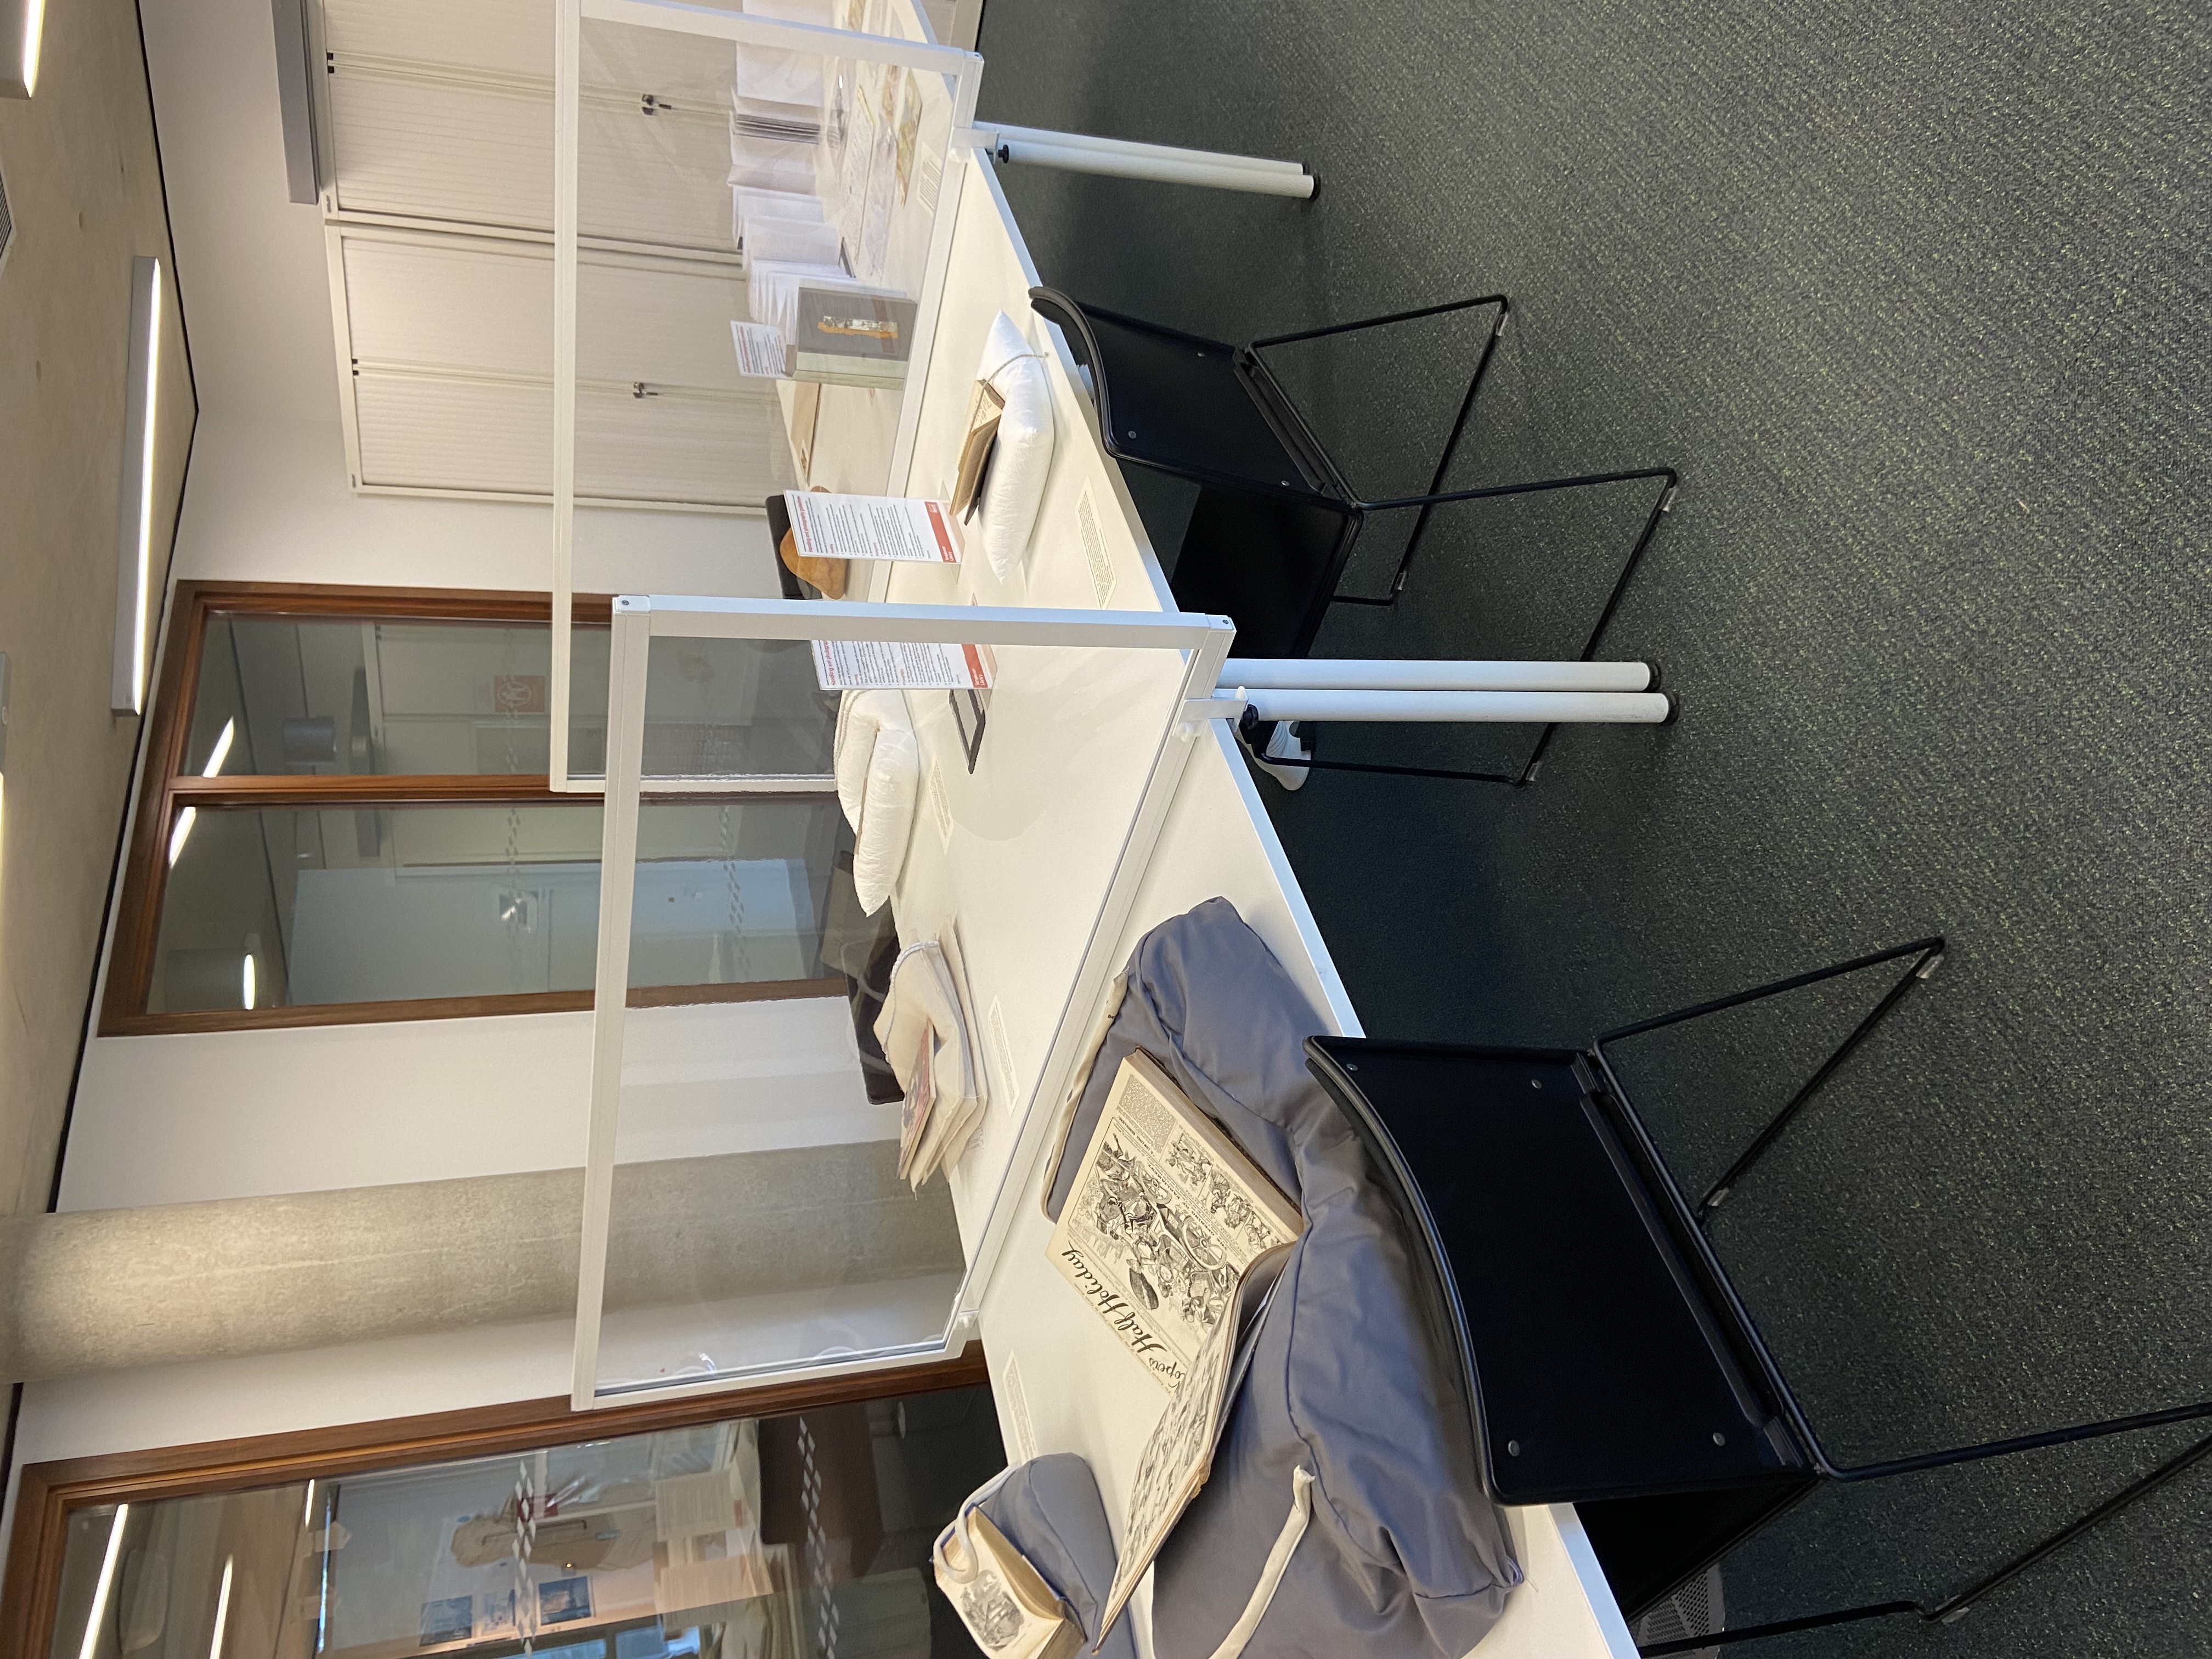 Display of SC&A items for potential University of Kent English students, October 2021